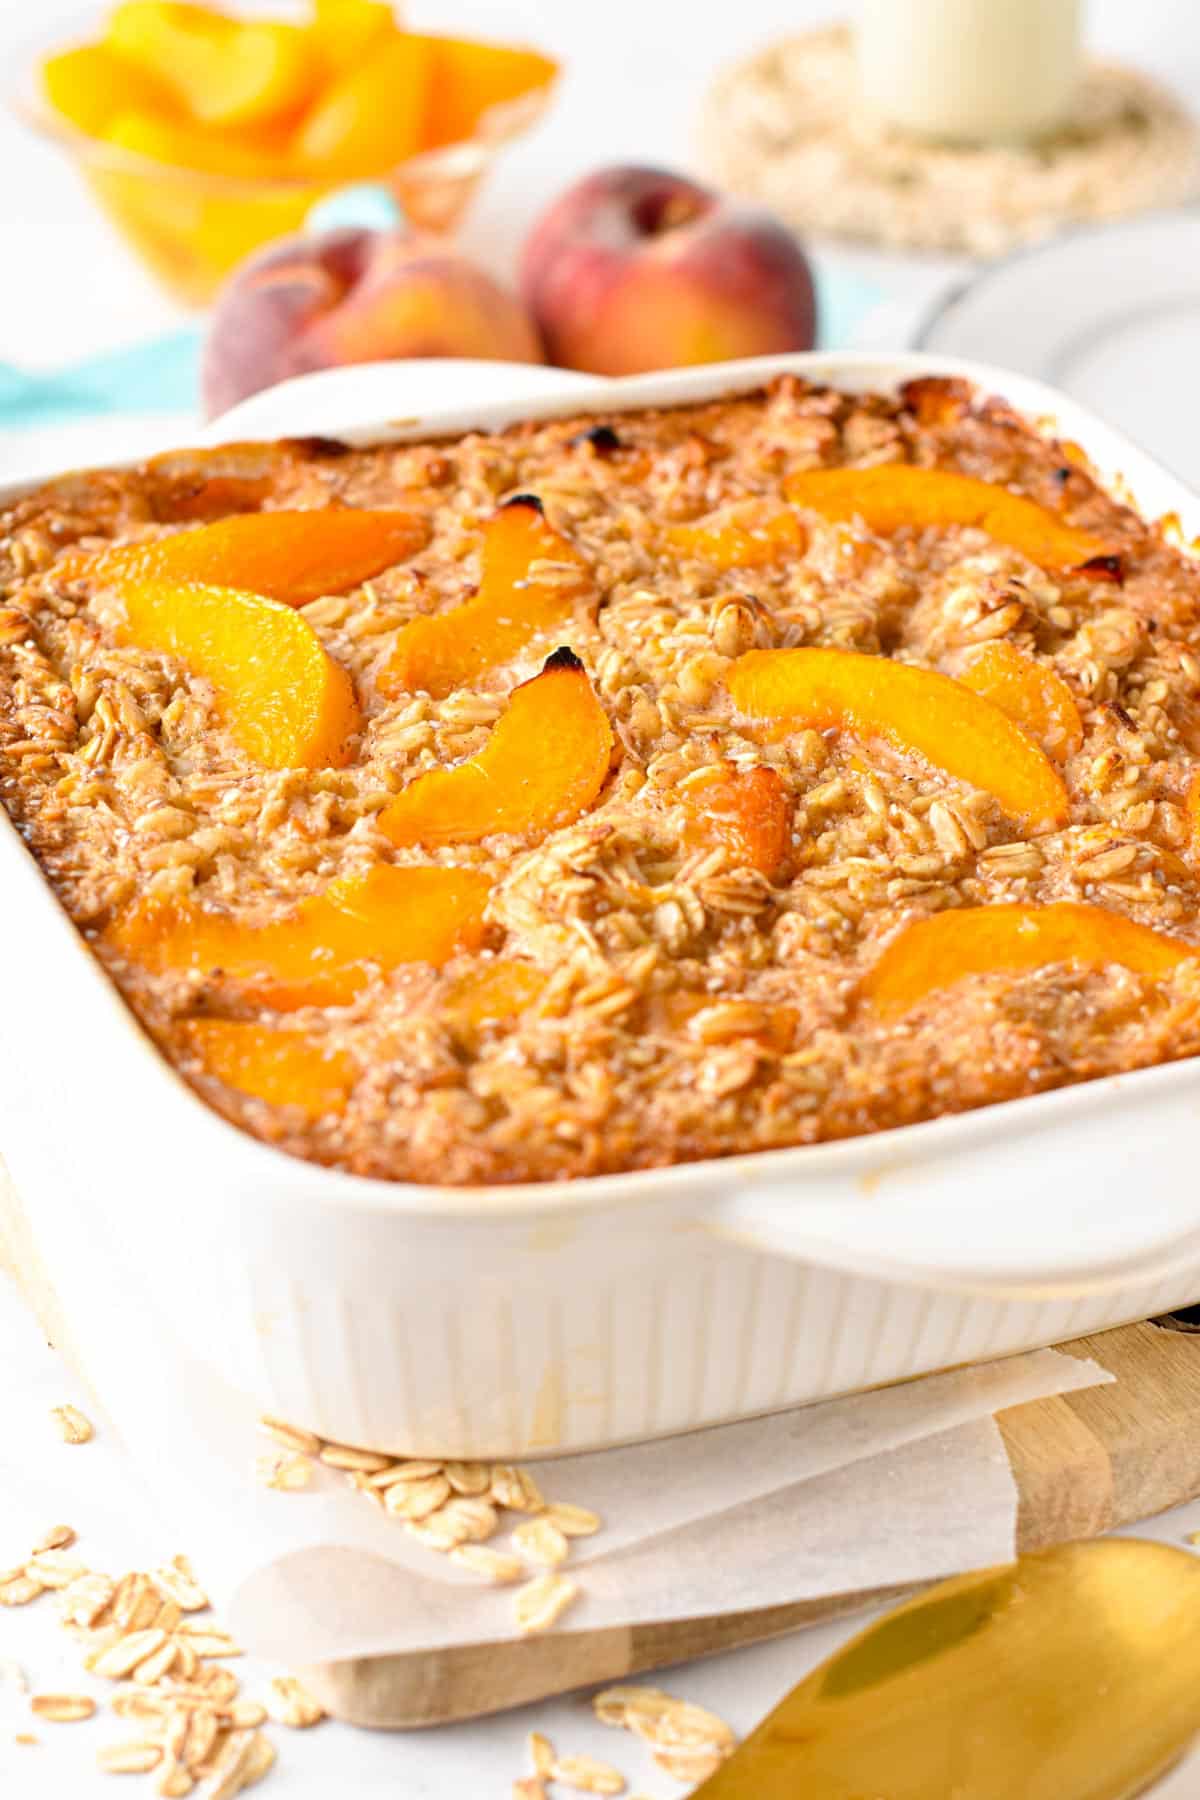 This Peach Baked Oatmeal isa creamy large batch of baked oatmeal filled with juicy peach. The perfect healthy family summer breakfast to use all your peaches this summer.This Peach Baked Oatmeal isa creamy large batch of baked oatmeal filled with juicy peach. The perfect healthy family summer breakfast to use all your peaches this summer.